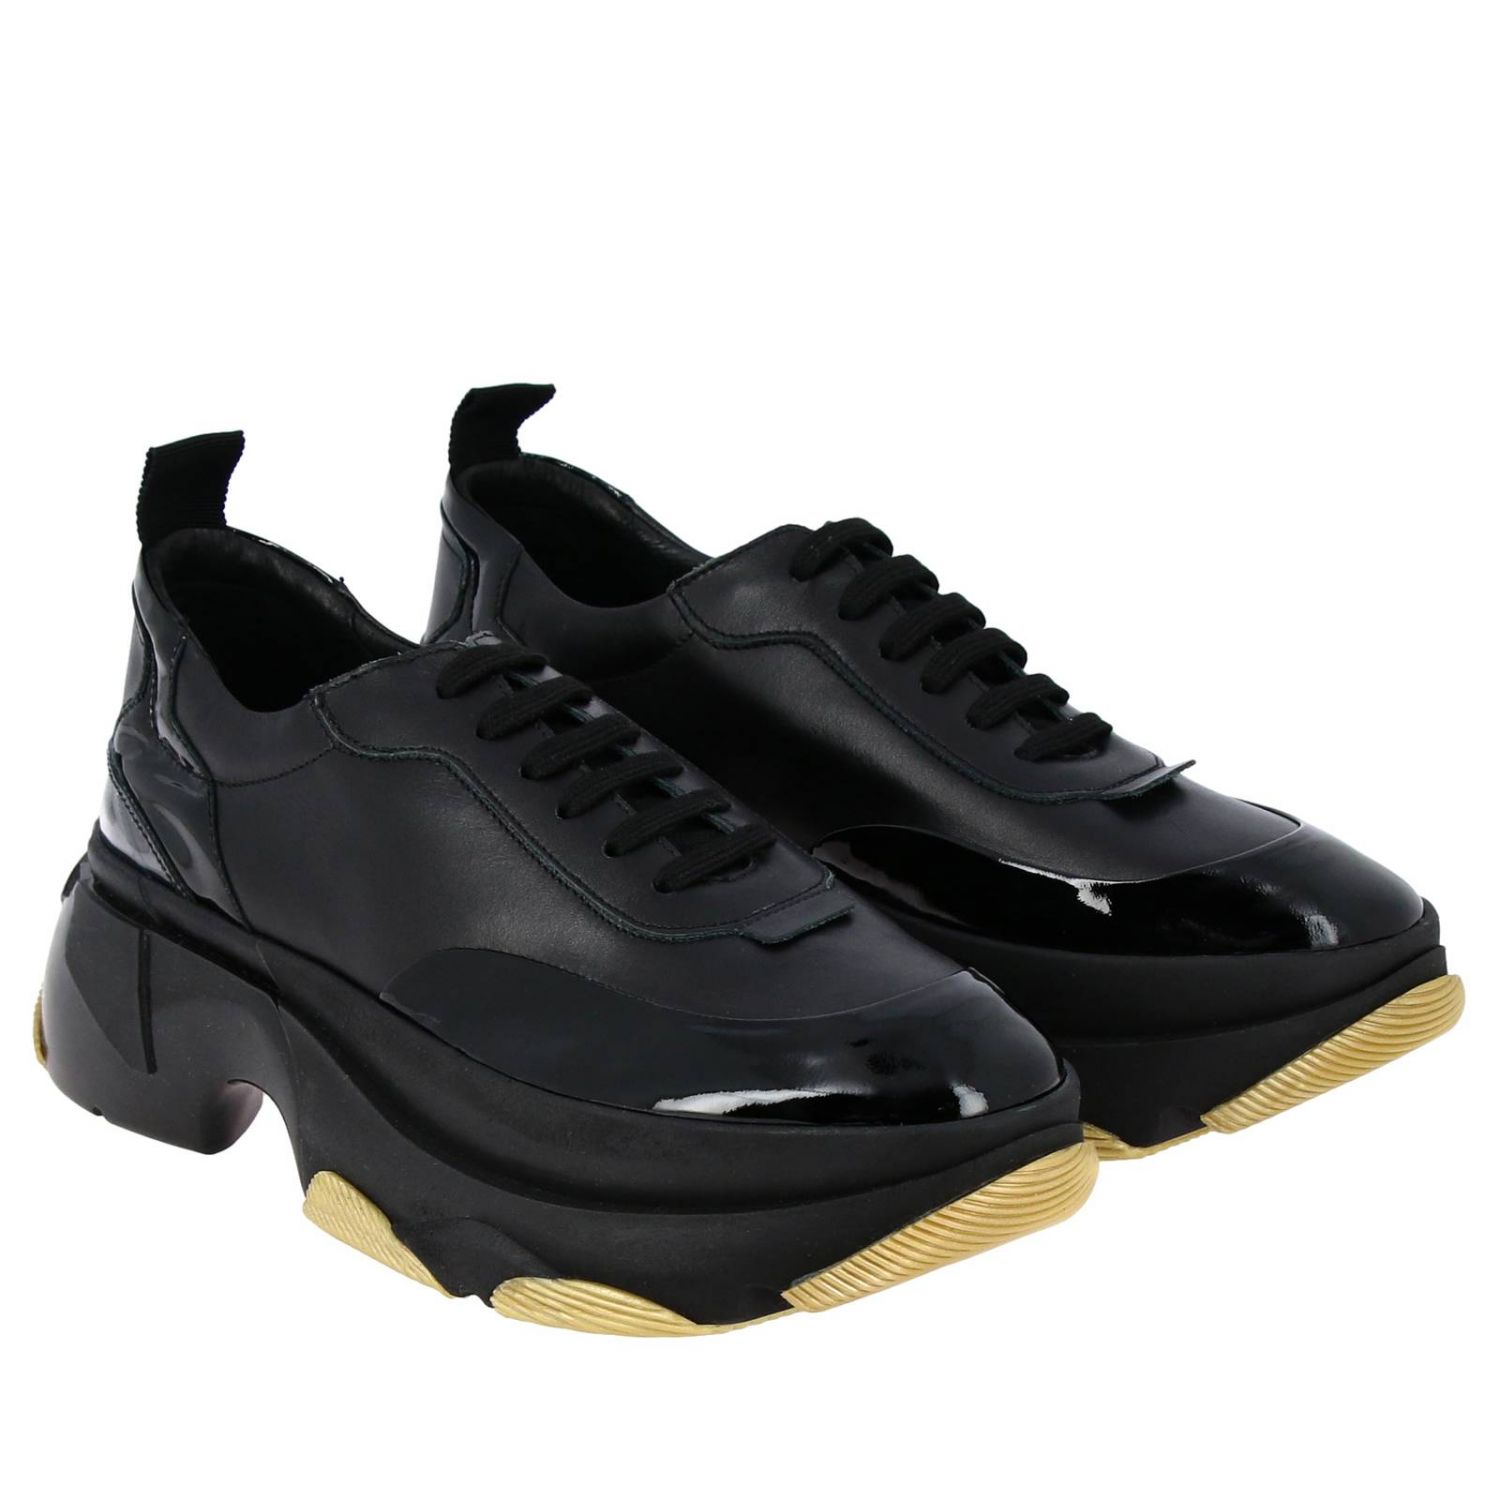 Patrizia Pepe Outlet: sneakers in leather and patent leather with maxi ...